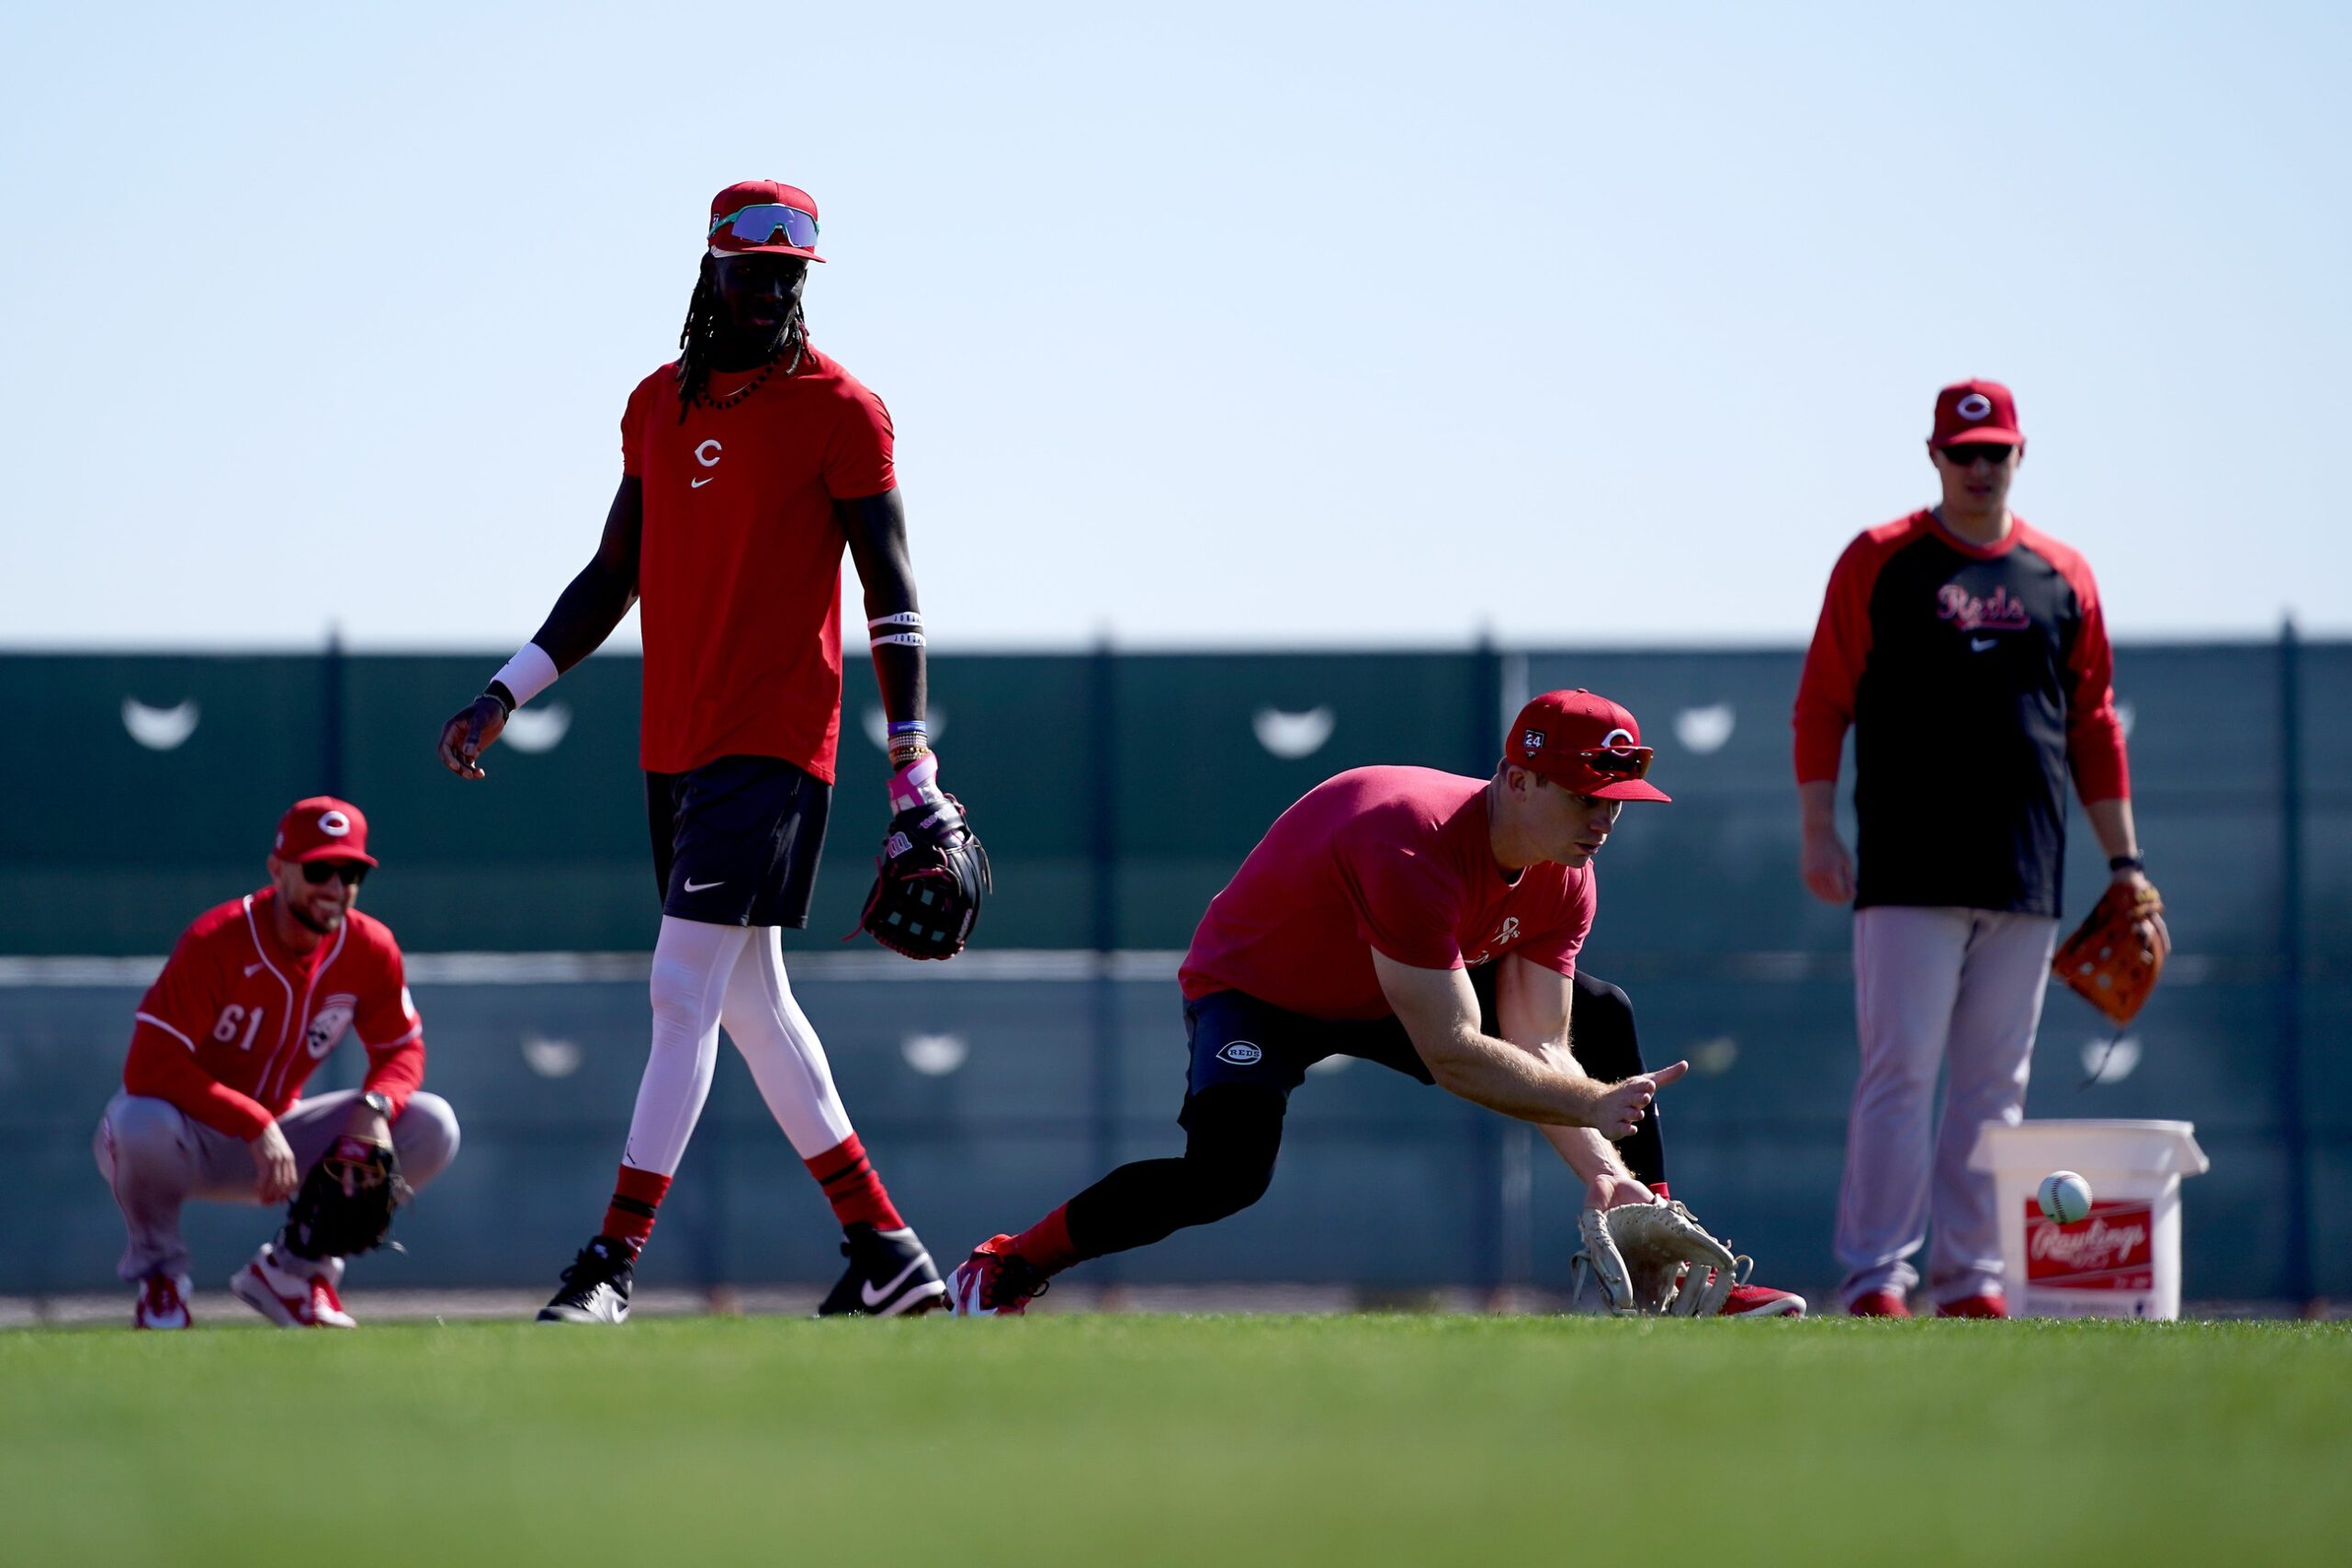 Reds Infielder Undergoes Surgery with No Timetable of His Return